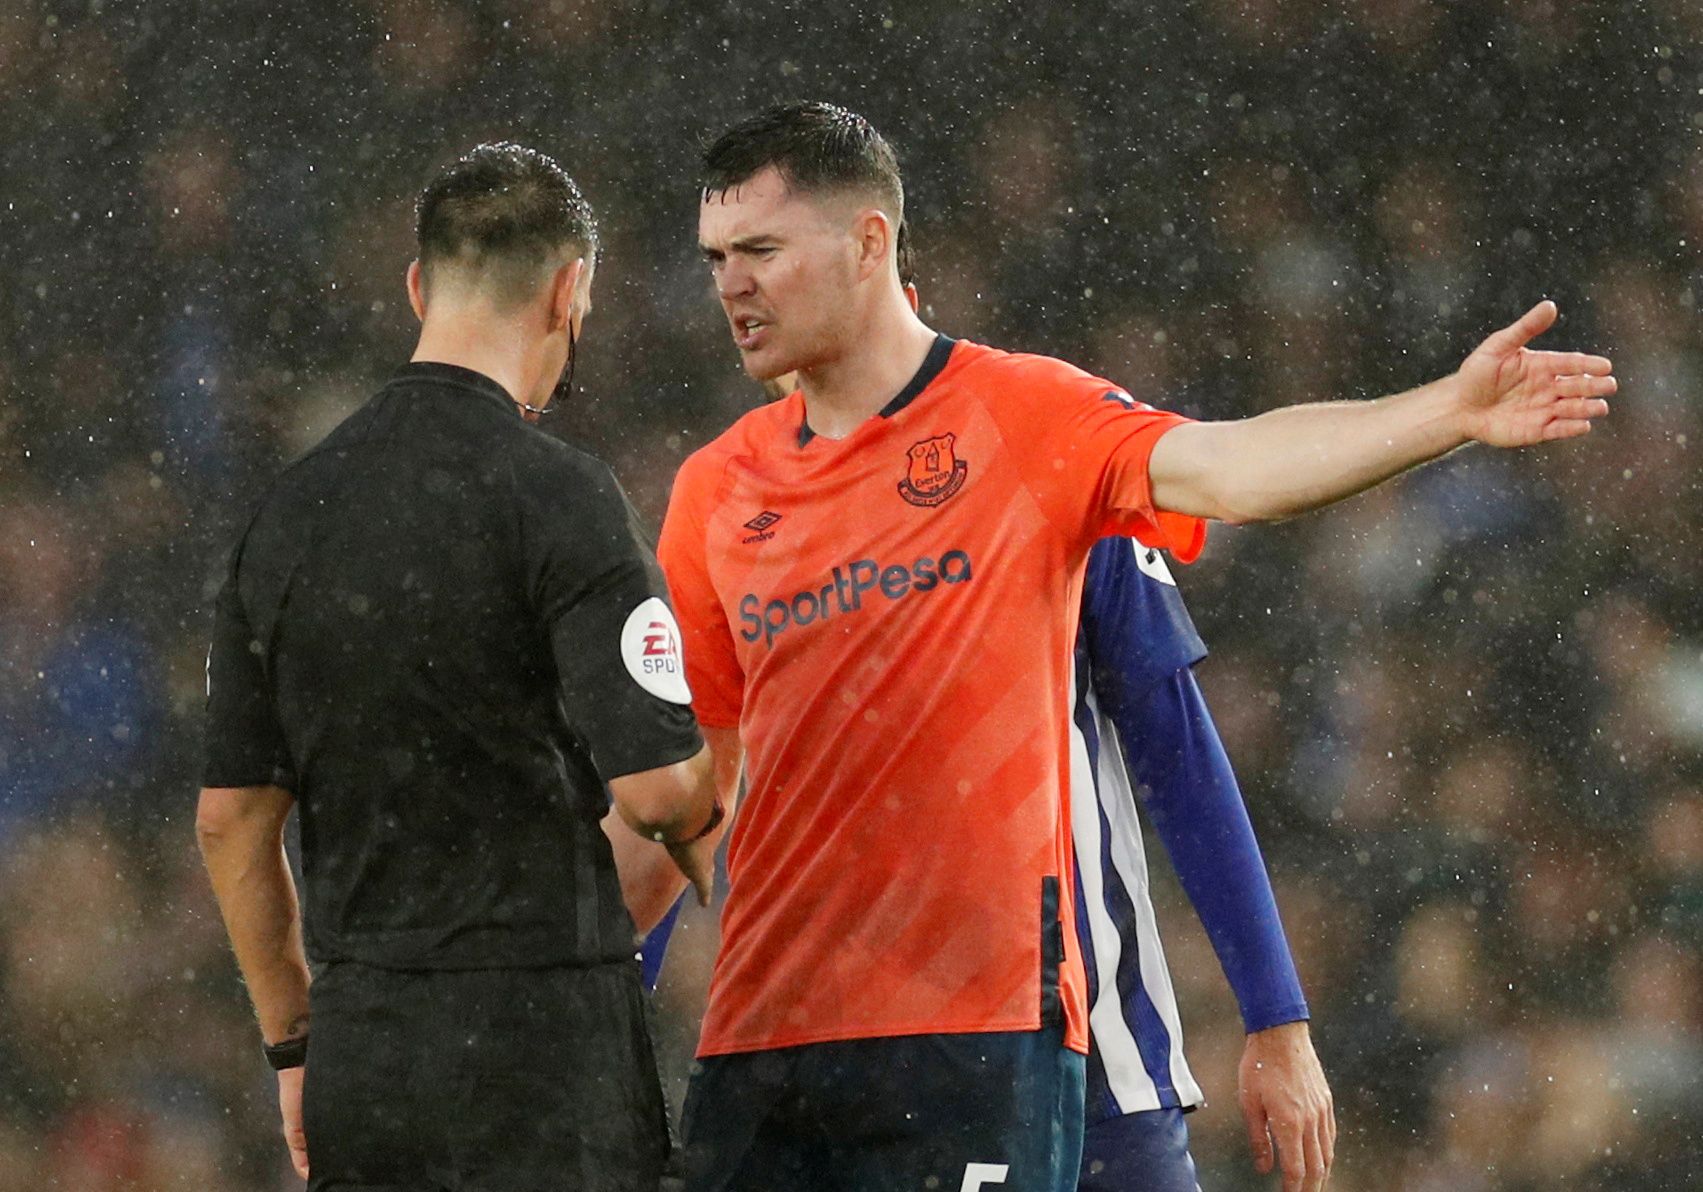 Soccer Football - Premier League - Brighton &amp; Hove Albion v Everton - The American Express Community Stadium, Brighton, Britain - October 26, 2019  Everton's Michael Keane remonstrates with referee Andrew Madley at the end of the match  Action Images via Reuters/John Sibley  EDITORIAL USE ONLY. No use with unauthorized audio, video, data, fixture lists, club/league logos or "live" services. Online in-match use limited to 75 images, no video emulation. No use in betting, games or single club/